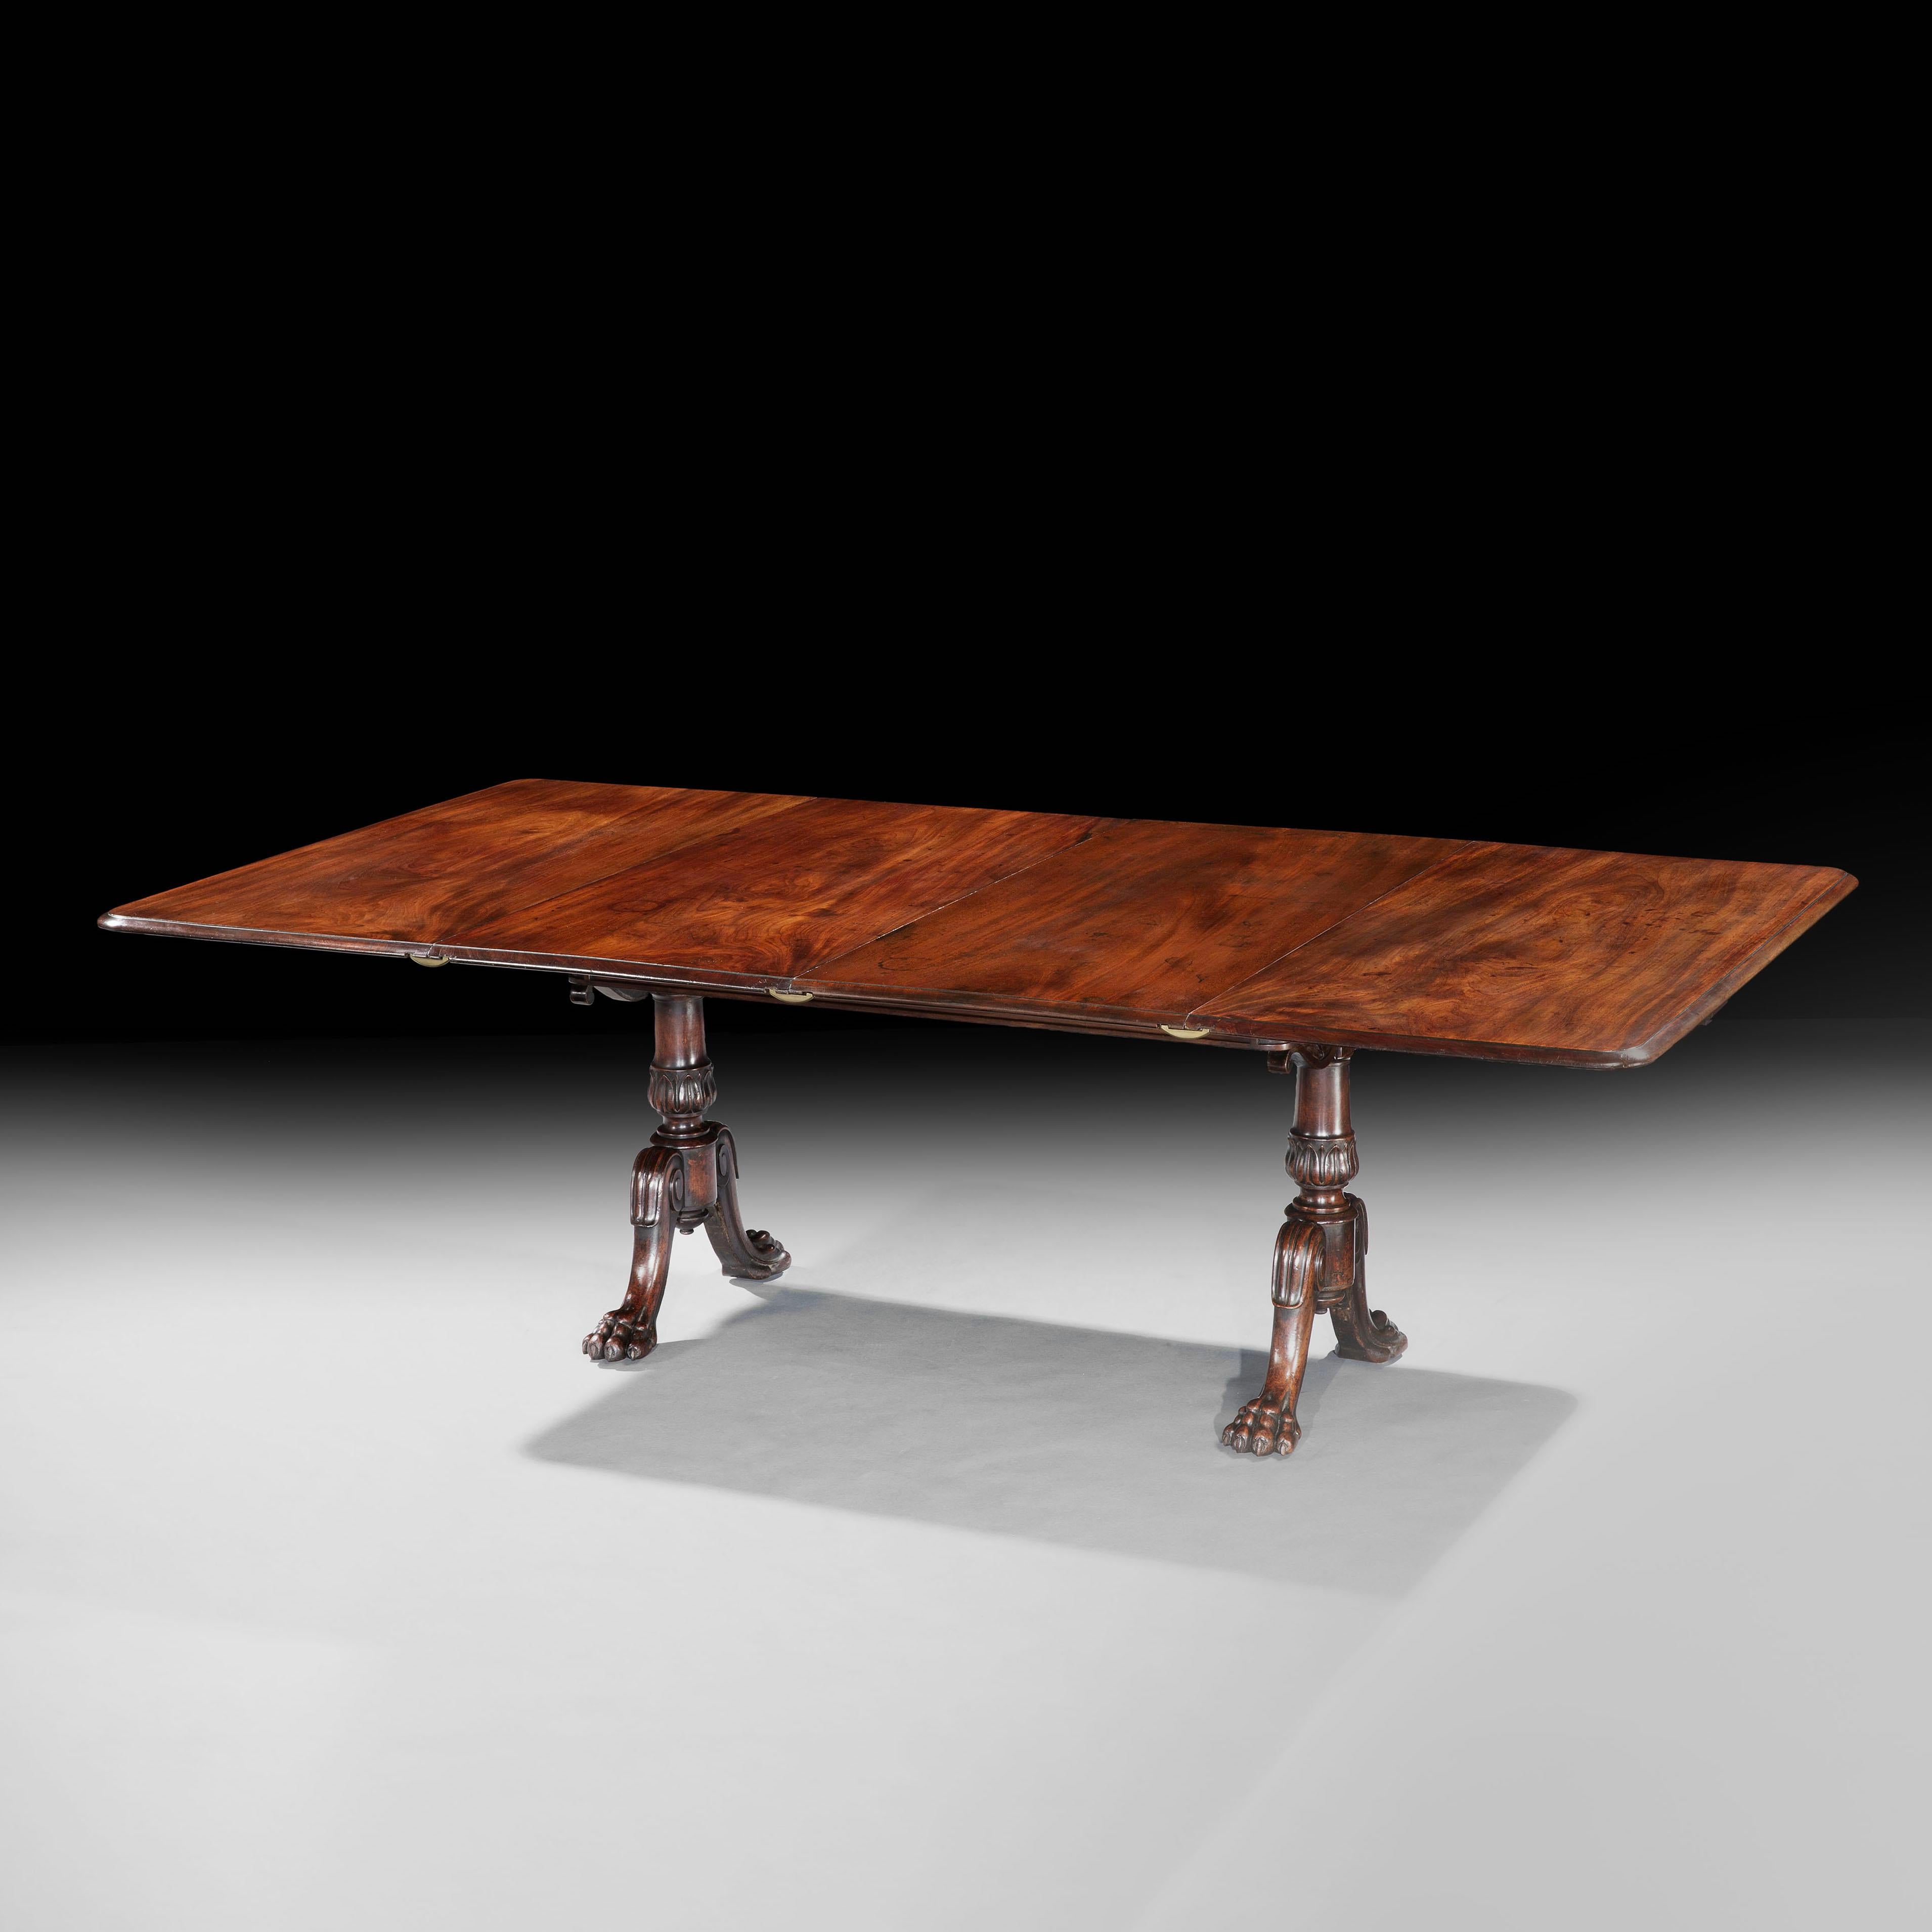 Rare 19th Century English Mahogany Extending Dining Table by Wilkinson & Sons For Sale 4